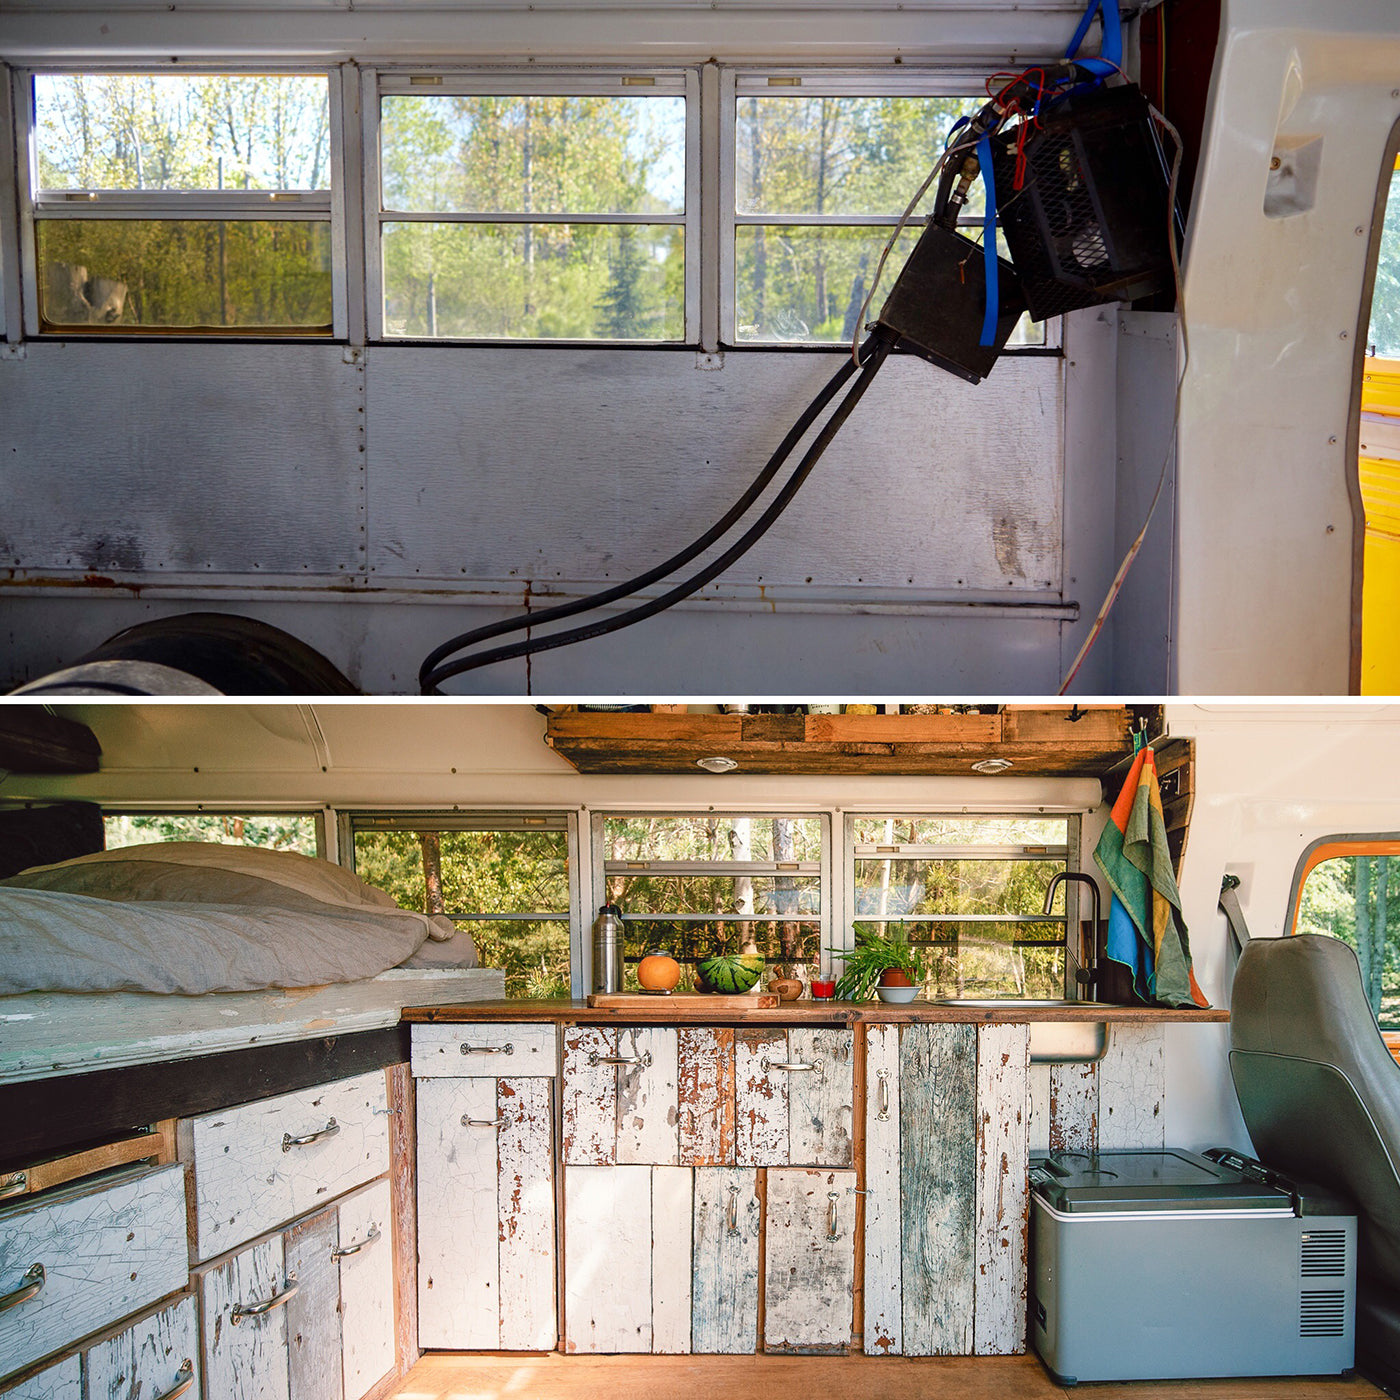 Photos of the interior of the bus–before and after the rebuild. (Photo: Kai Branss)